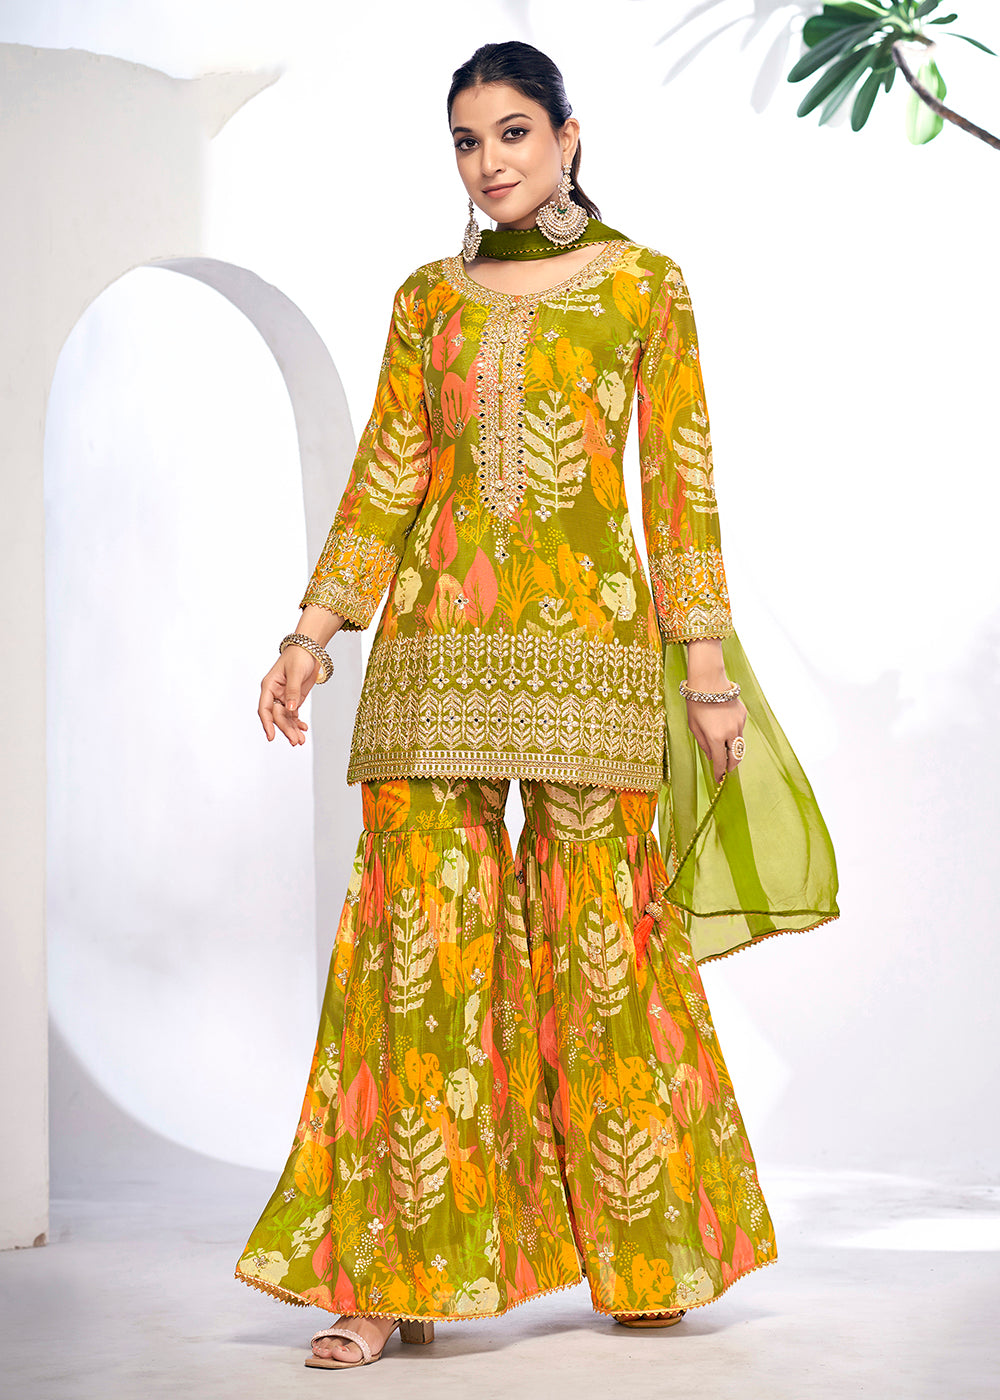 Shop Now Green Embroidered & Printed Festive Gharara Suit Online at Empress Clothing in USA, UK, Canada, Italy & Worldwide.